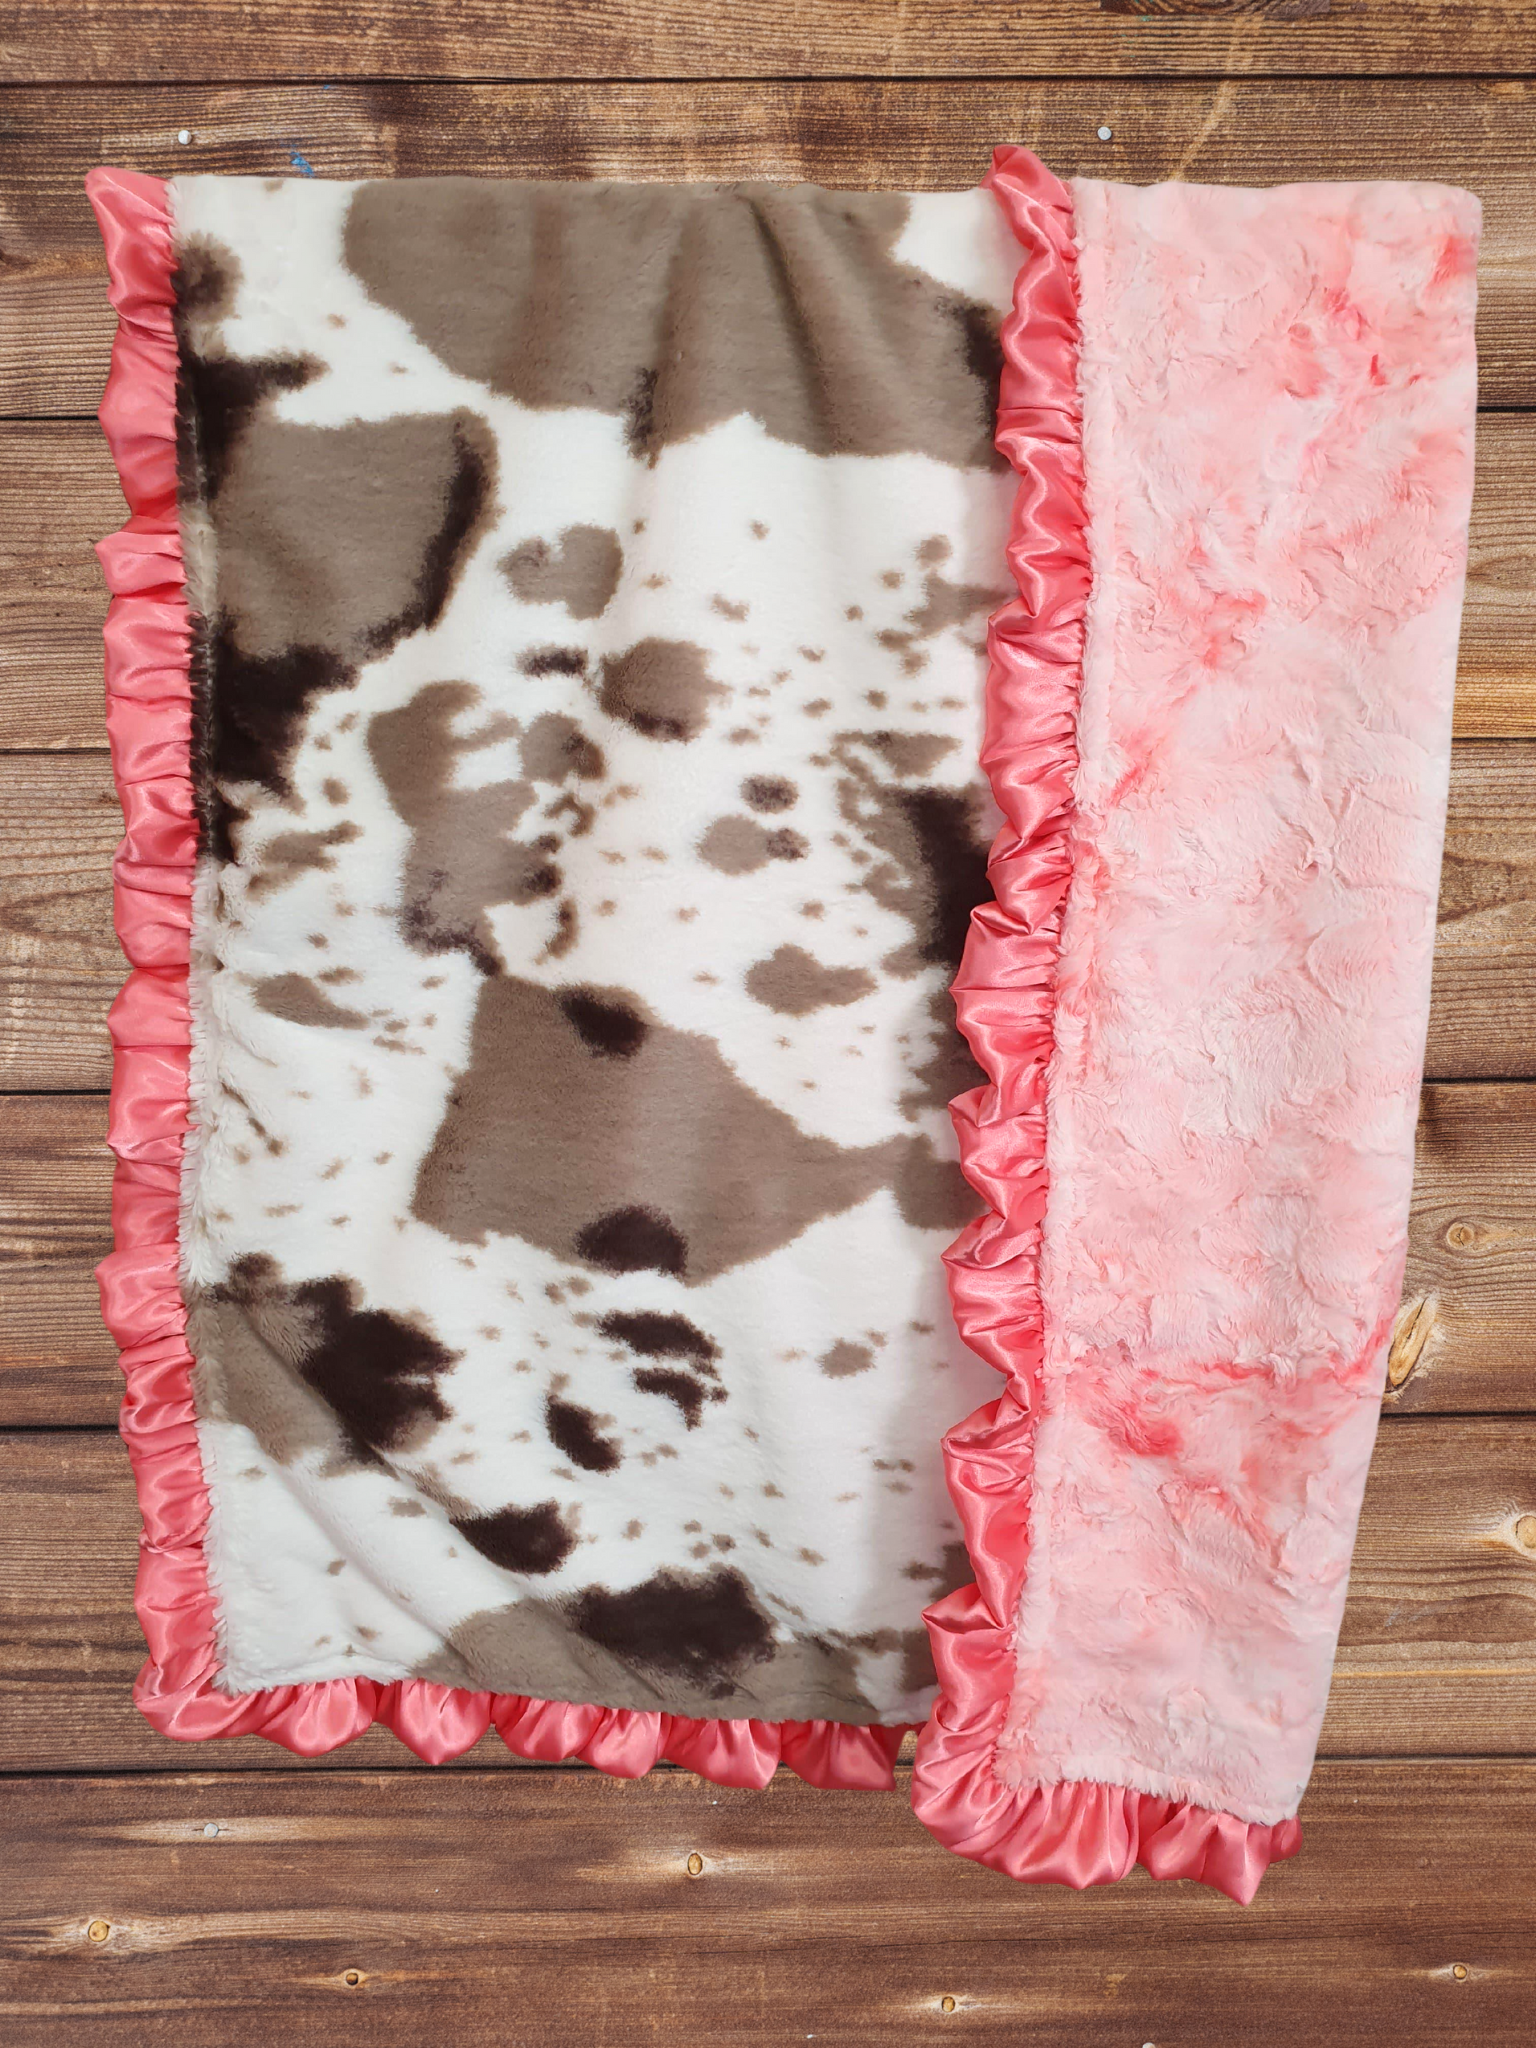 Ruffle Baby Blanket - Brown Sugar Cow and Blossom Minky Western Blanket